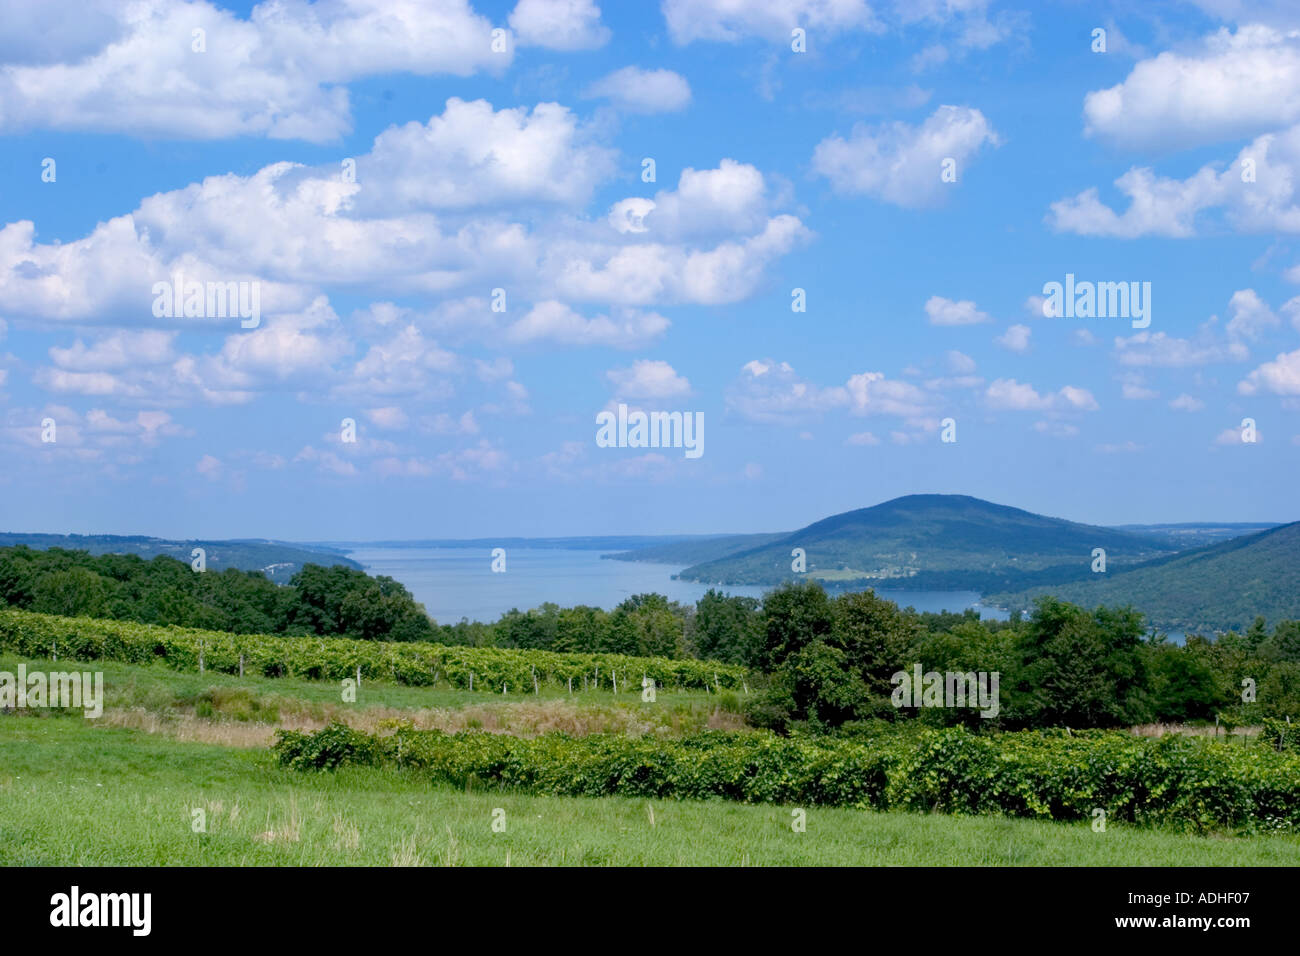 Grape vineyards on hills above Canandaigua Lake in the Finger Lakes region of New York State USA Stock Photo